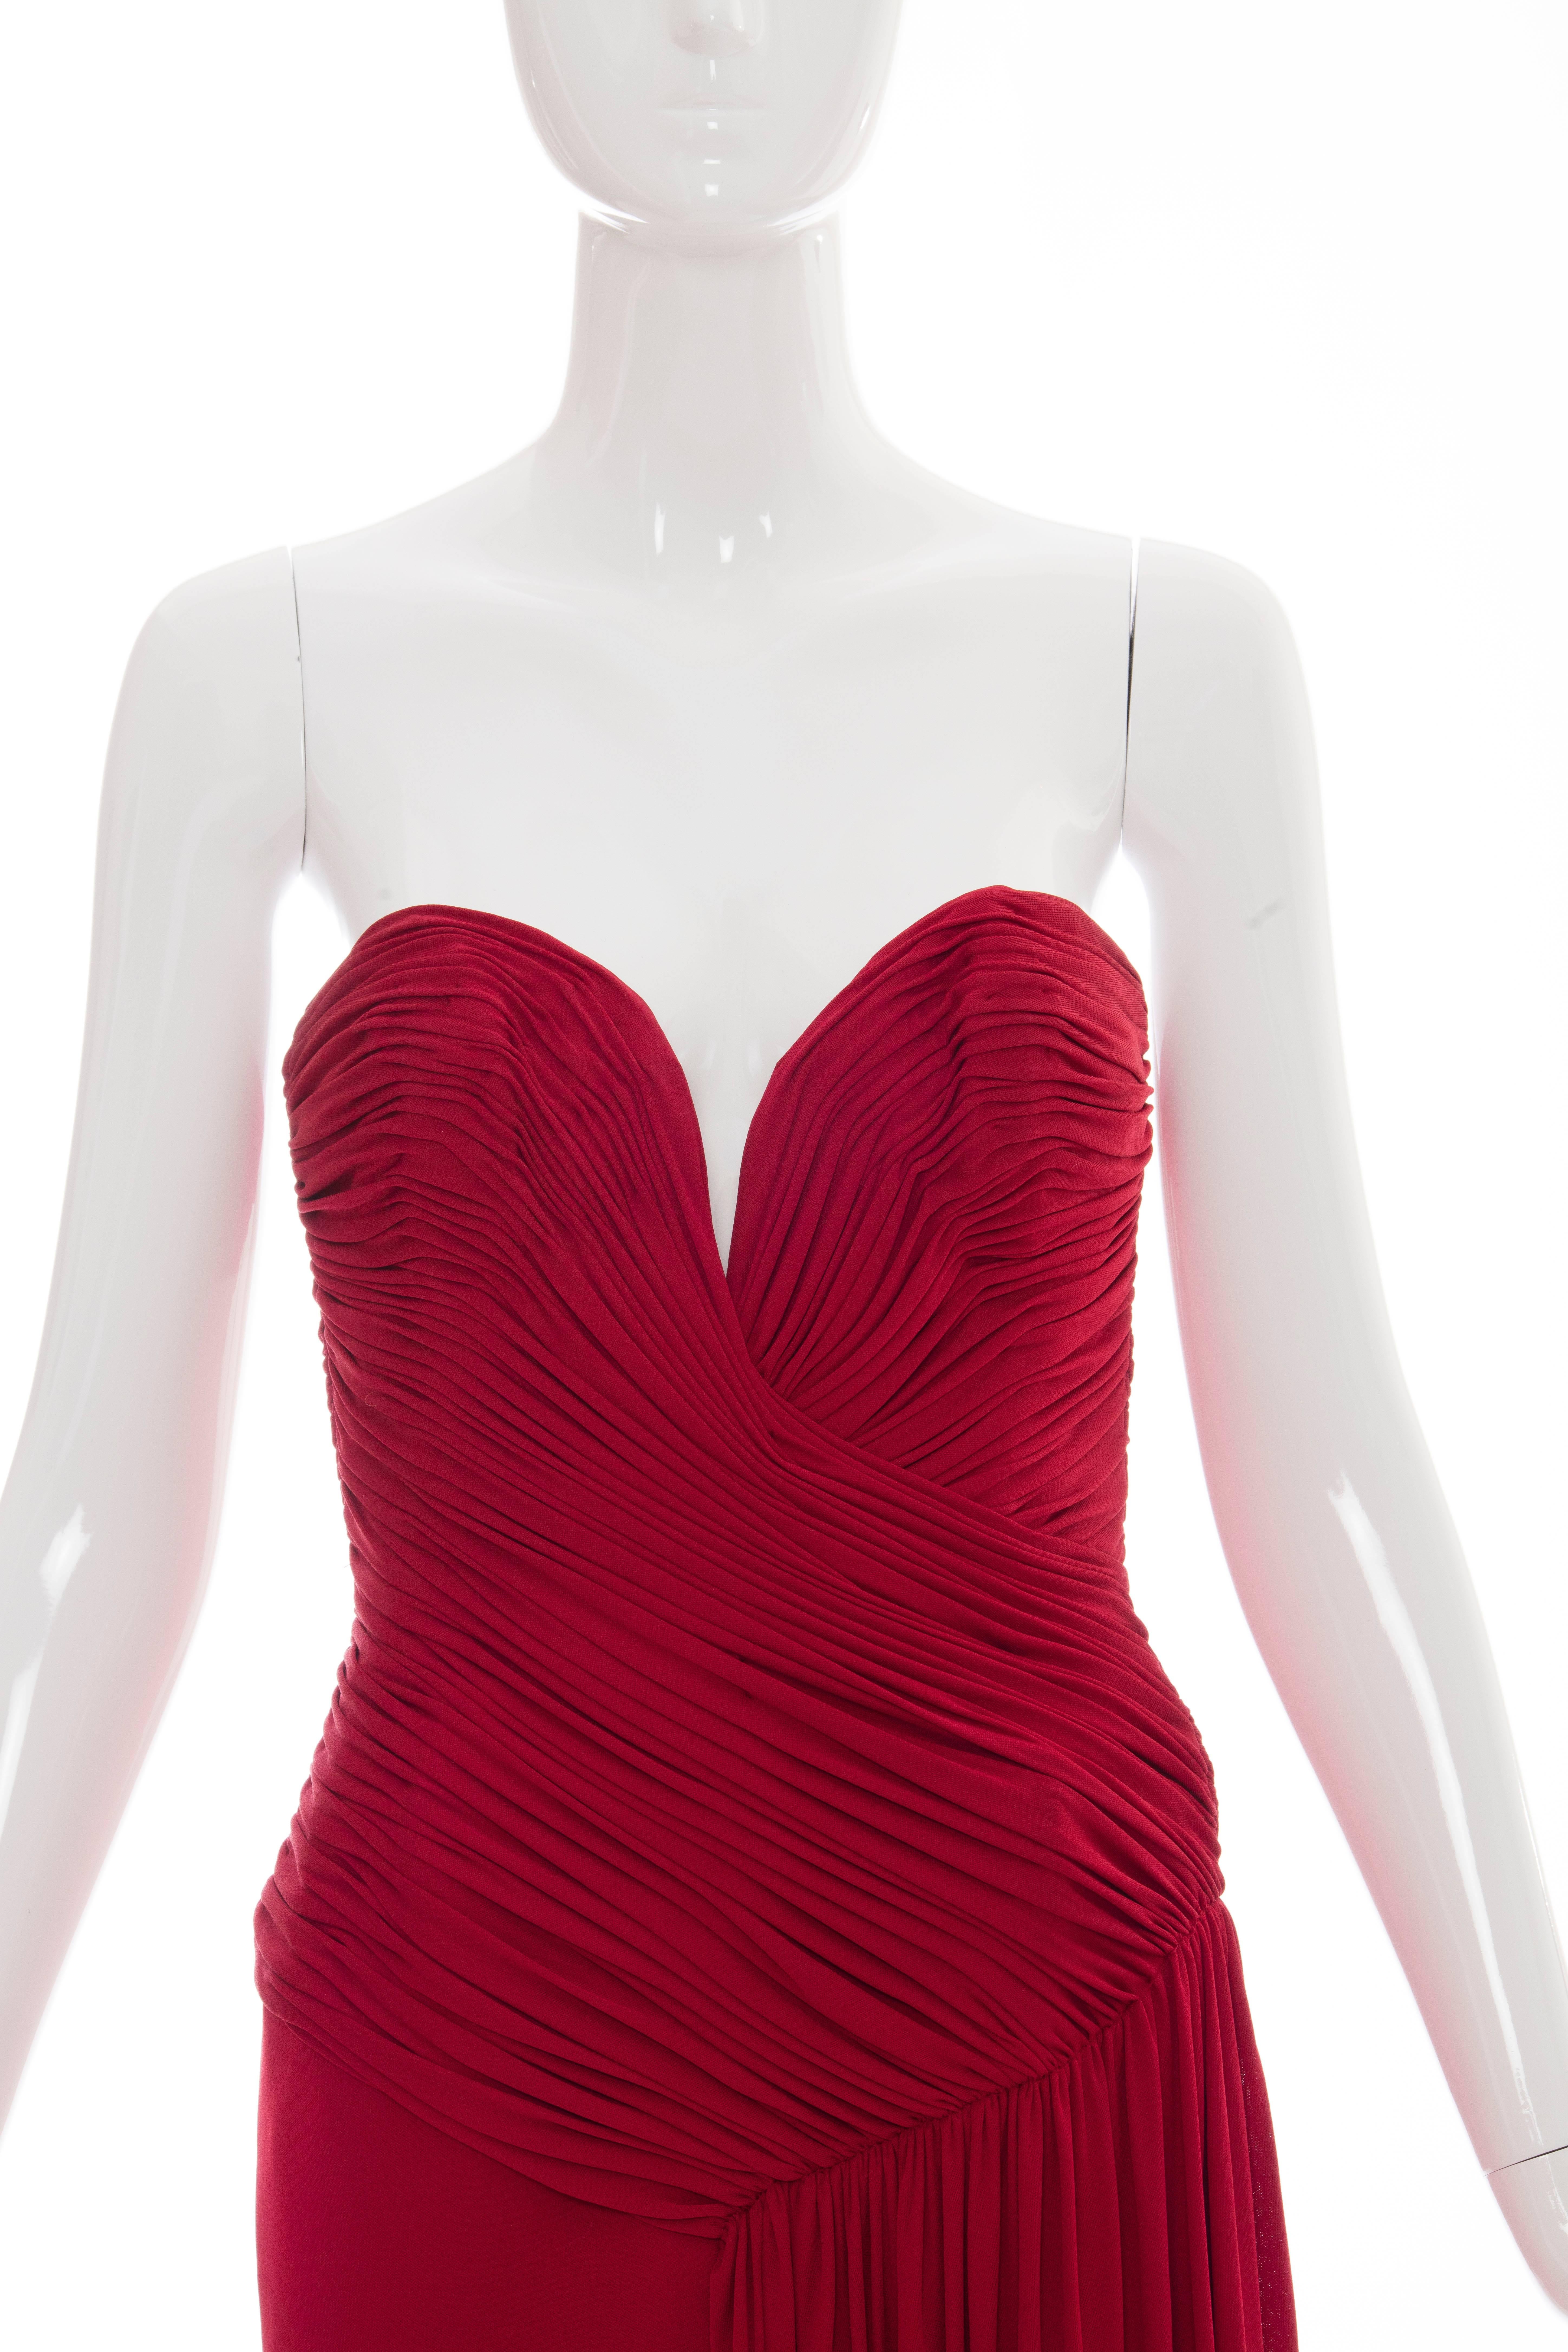 Vicky Tiel Couture Red Strapless Dress With Ruched Bodice, Circa 1980's For Sale 2